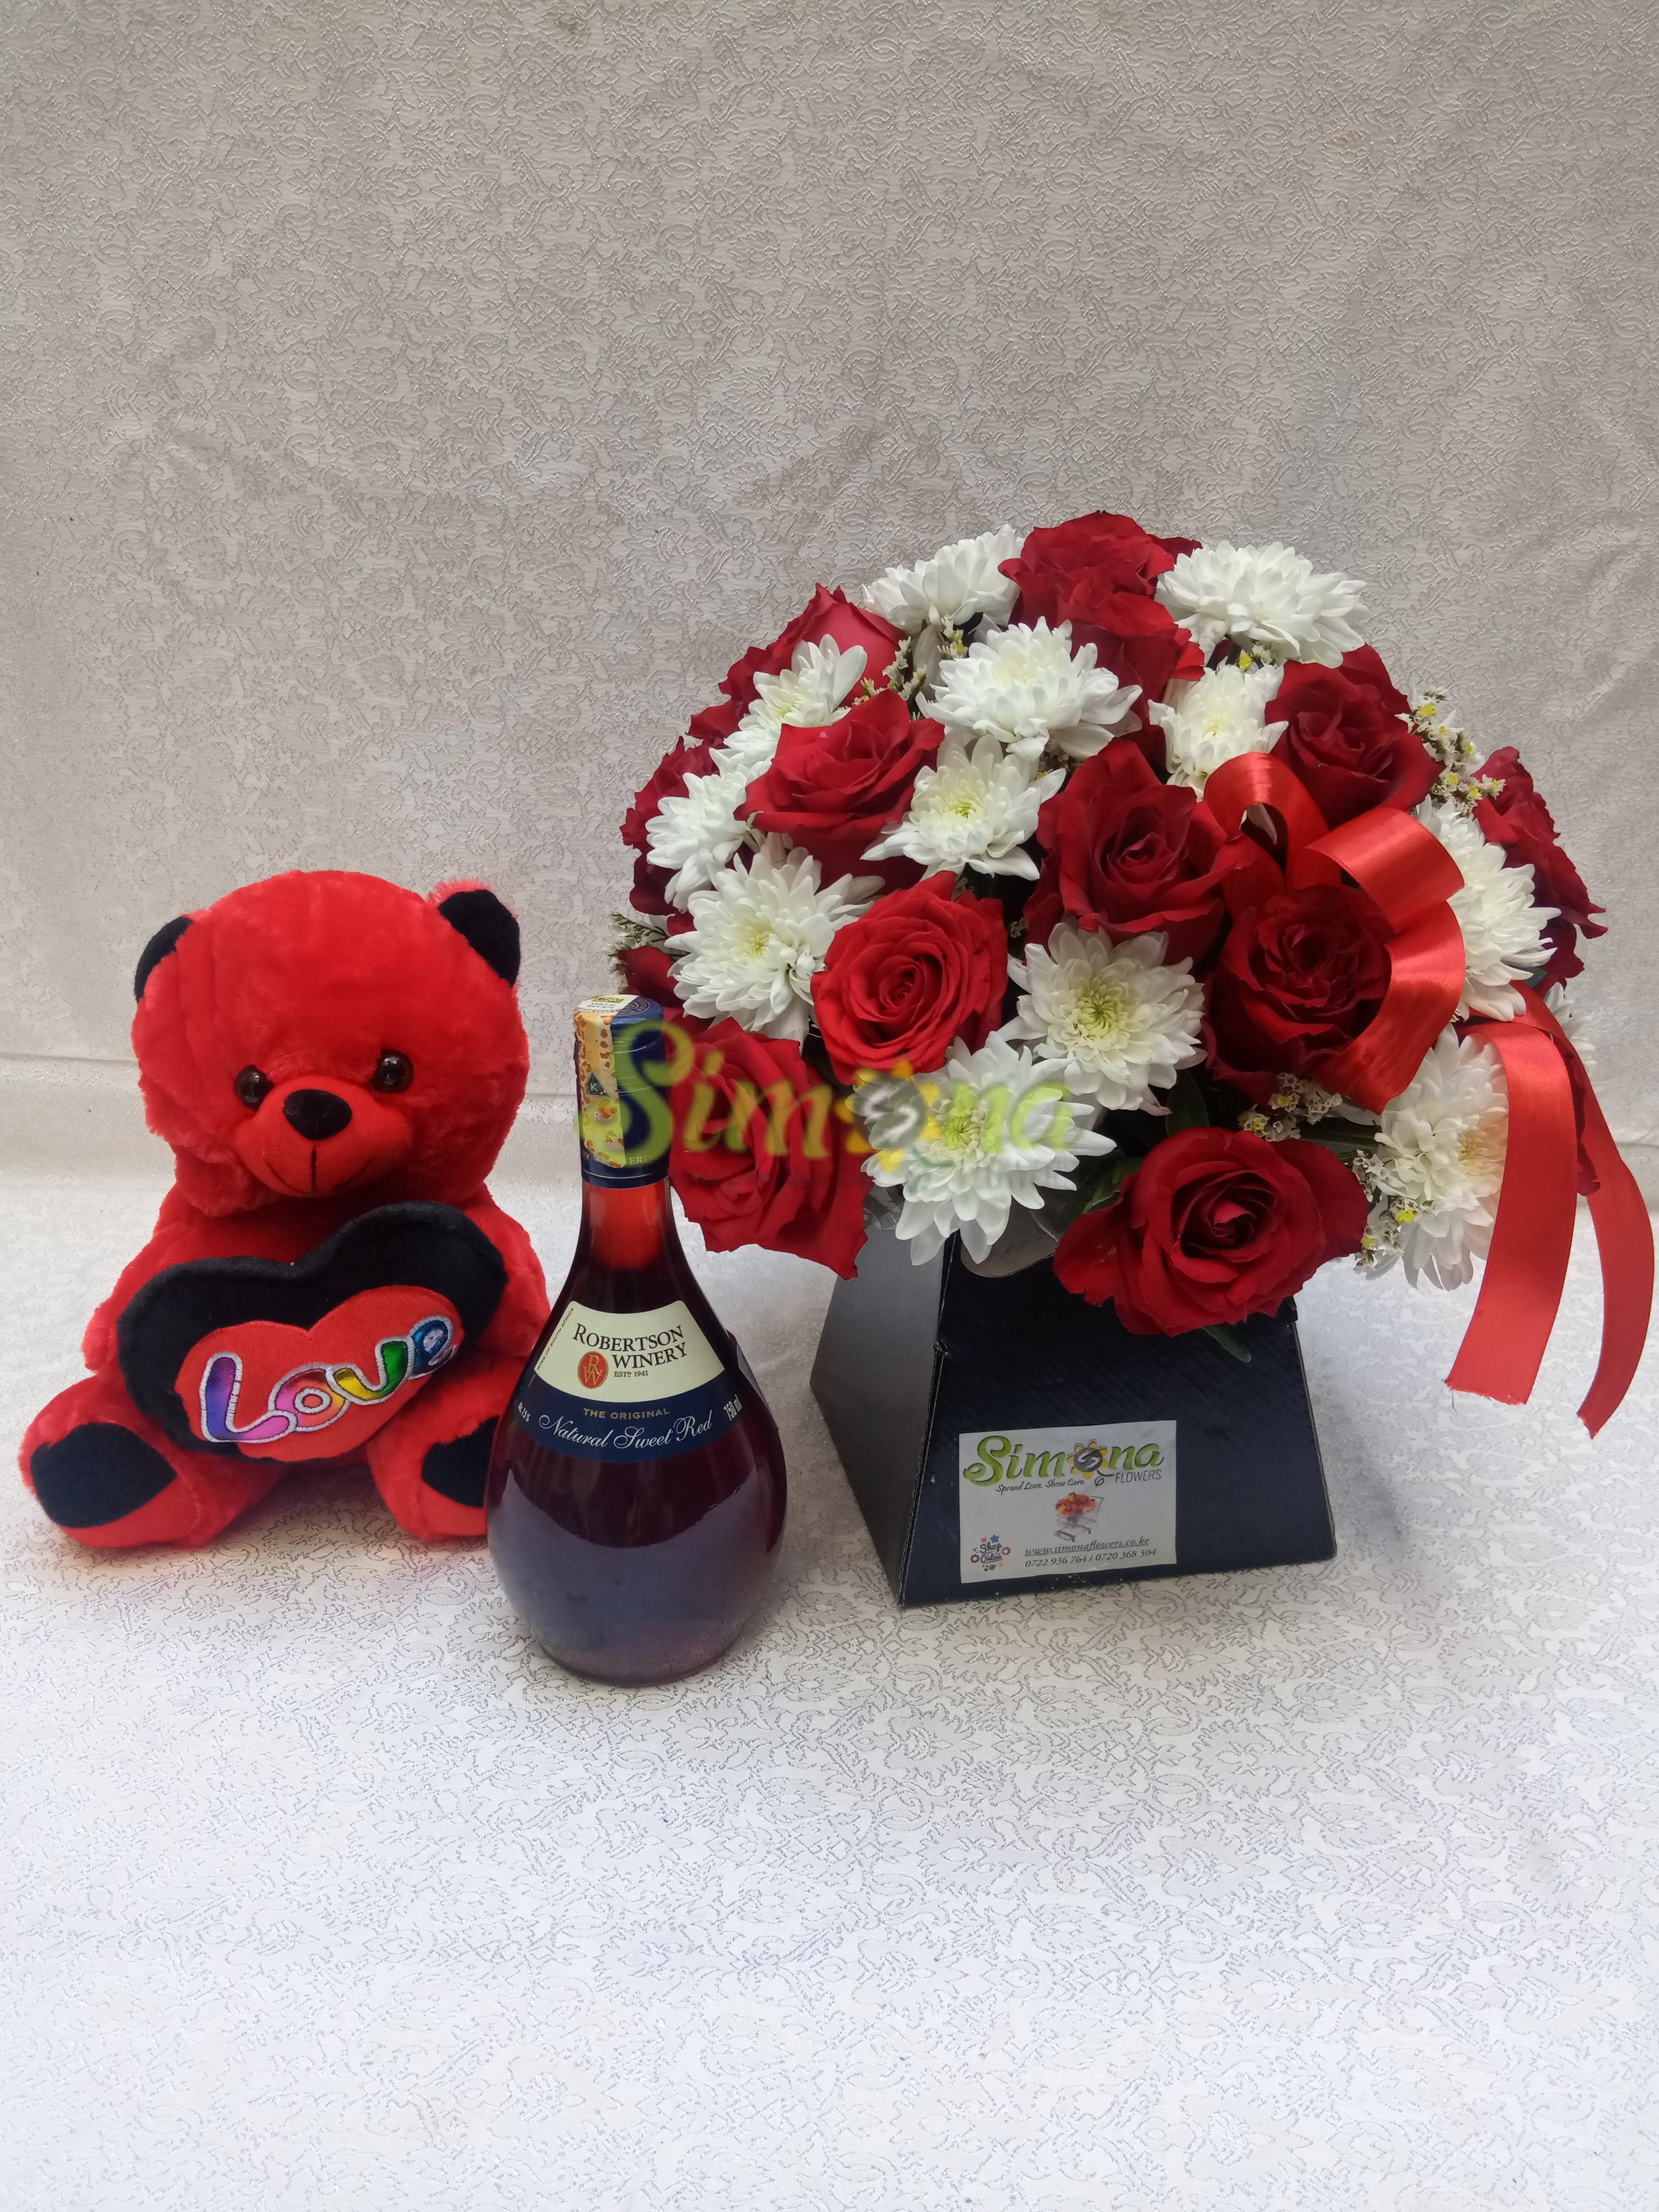 Adorable bouquet with teddy bear and red wine